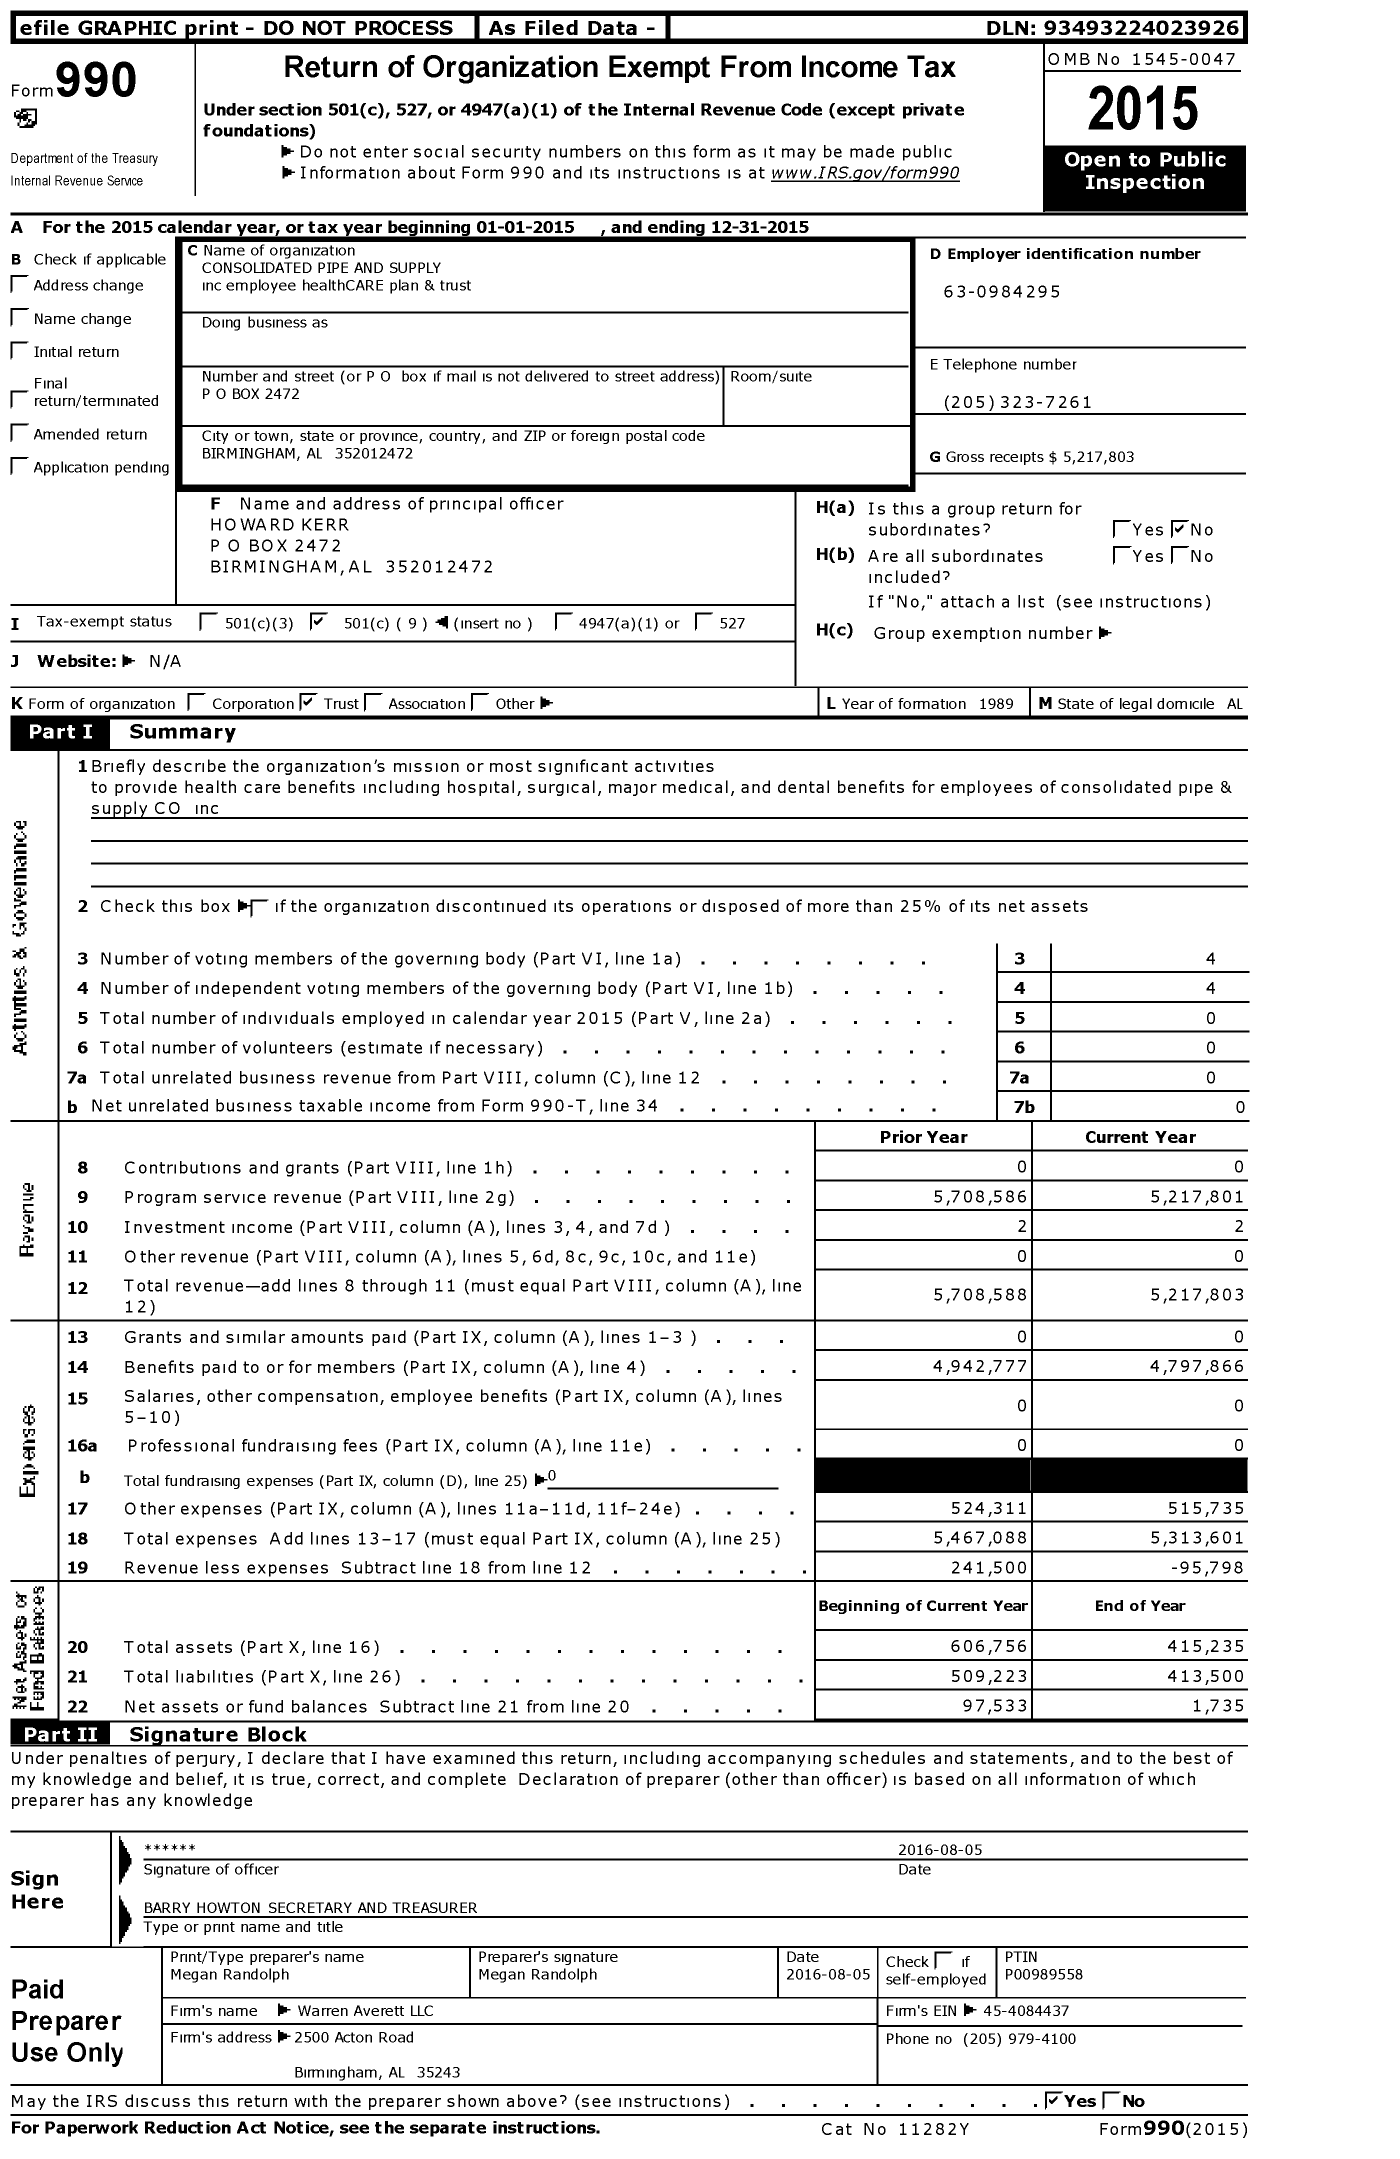 Image of first page of 2015 Form 990O for CONSOLIDATED PIPE AND SUPPLY employee healthCARE plan AND trust